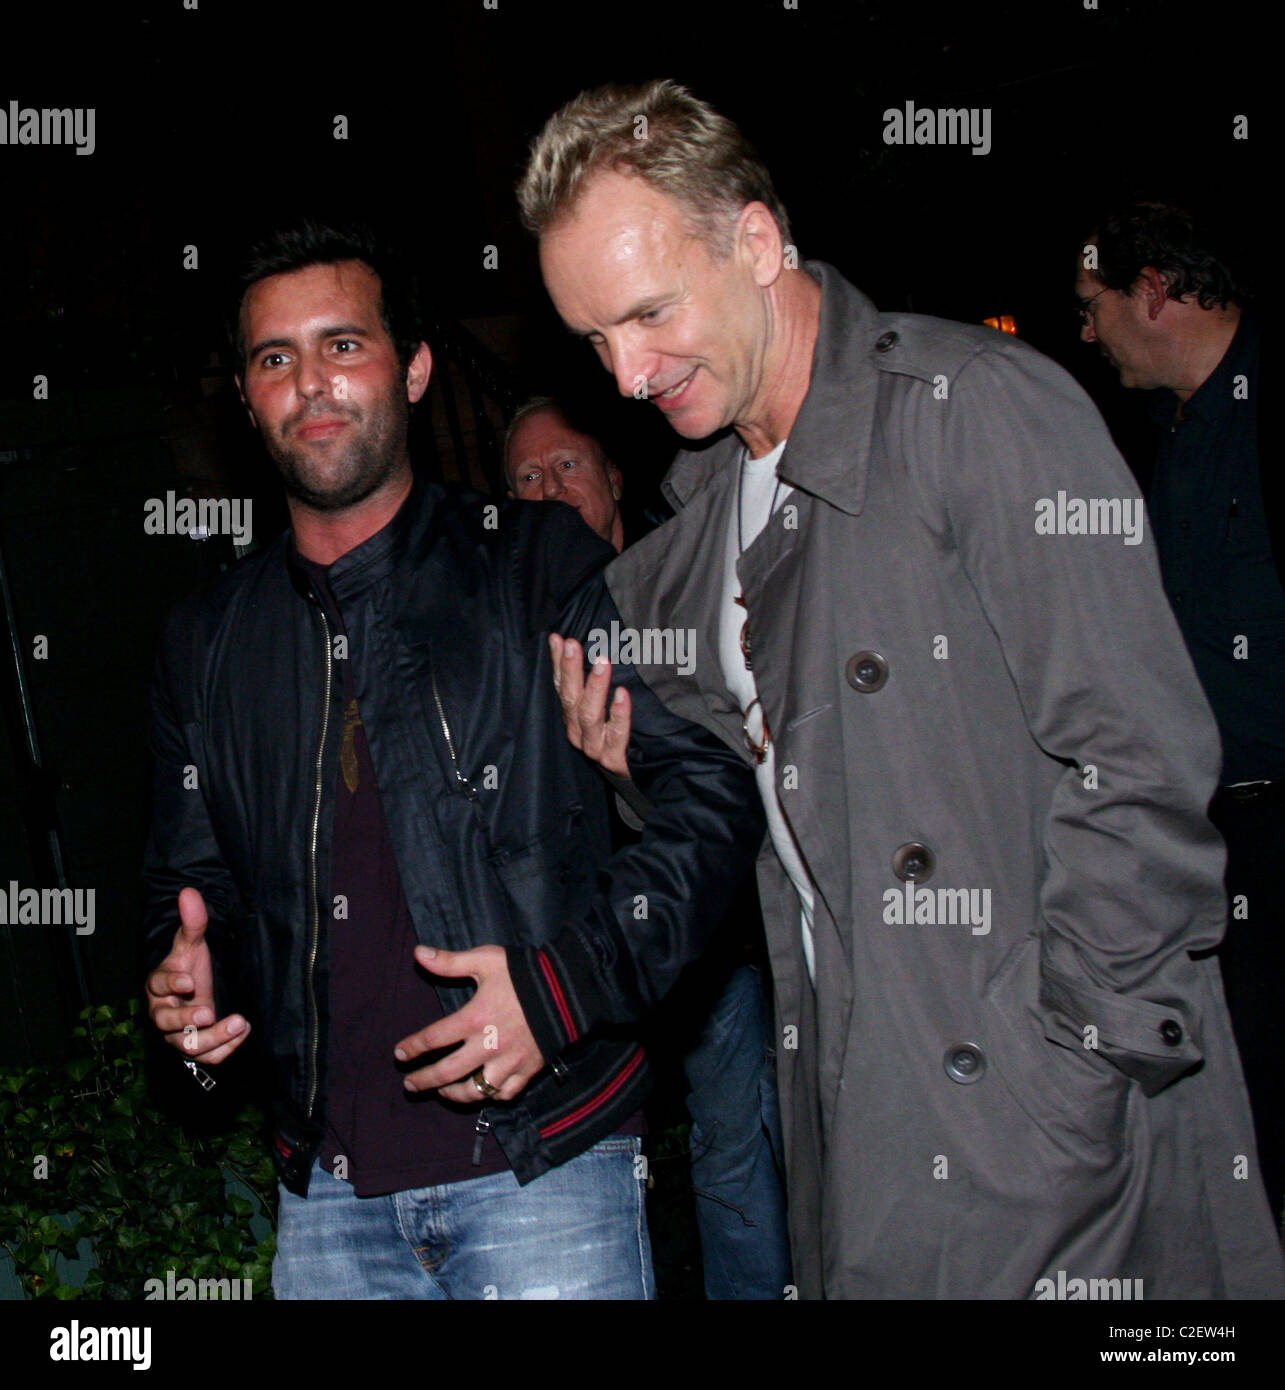 Sting and guest  Celebrities outside the Waverly Inn  New Yory City, USA- 31.10.07 Stock Photo